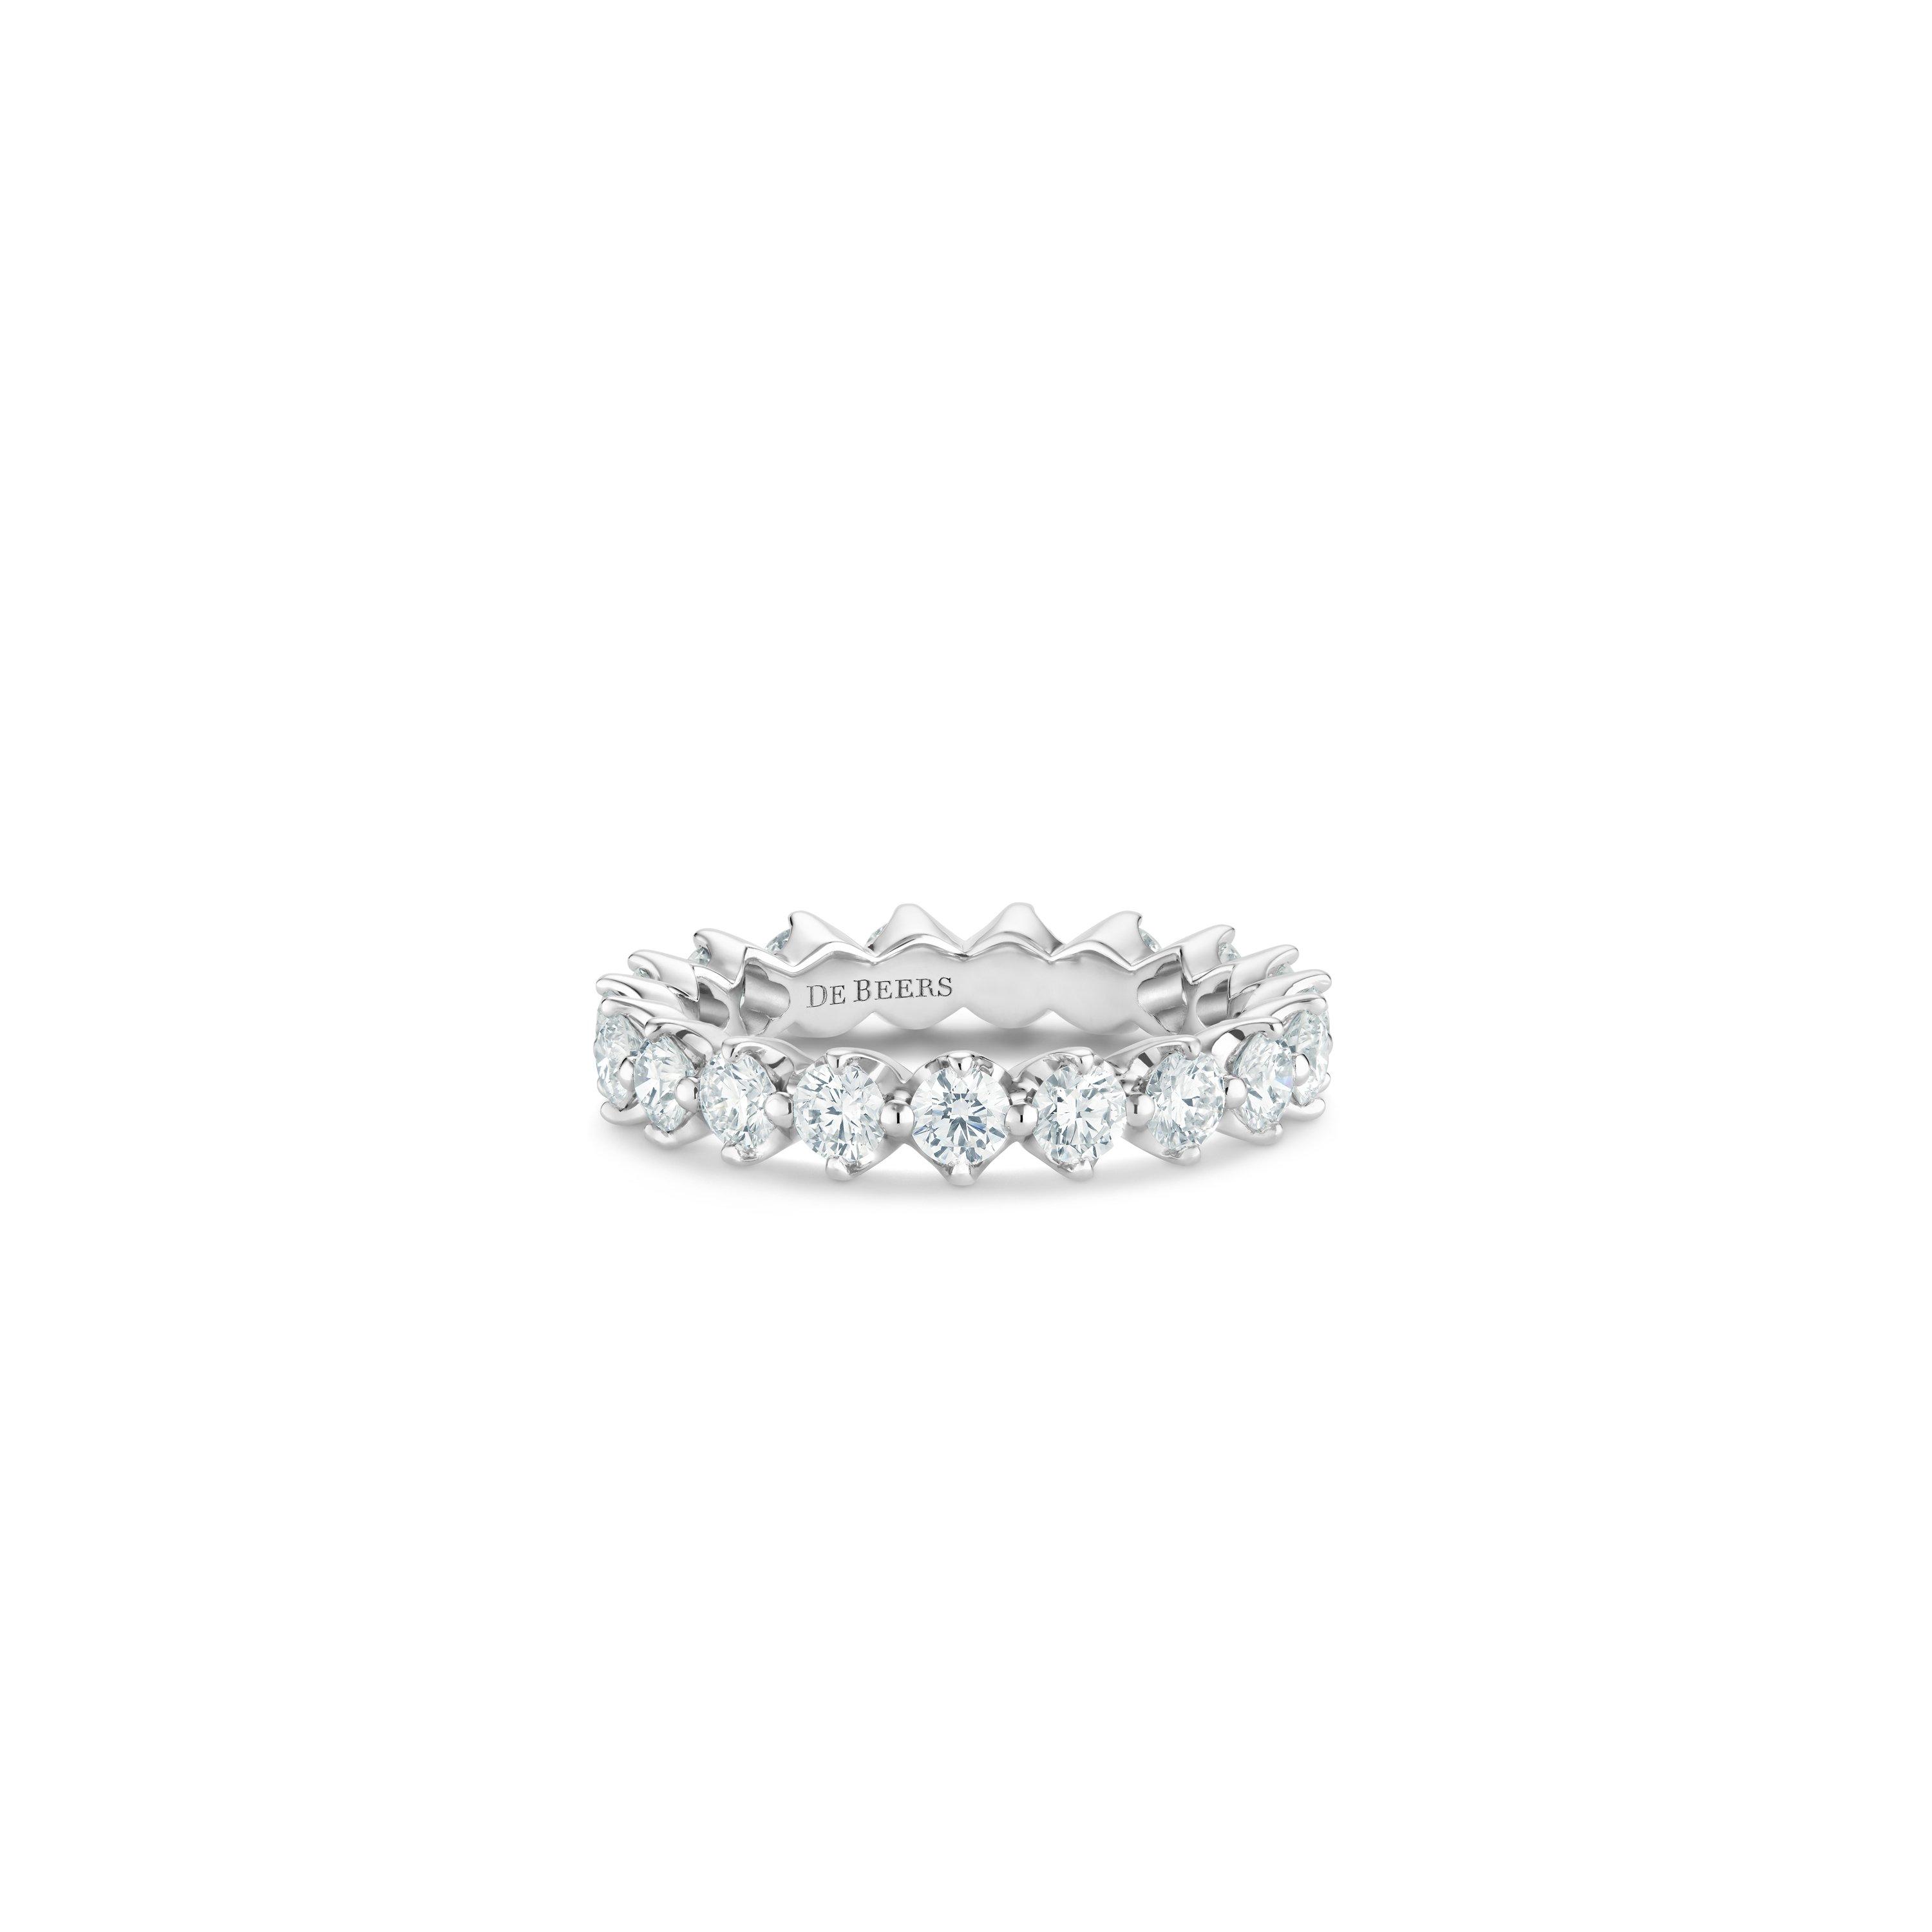 Allegria small eternity band in platinum, image 1